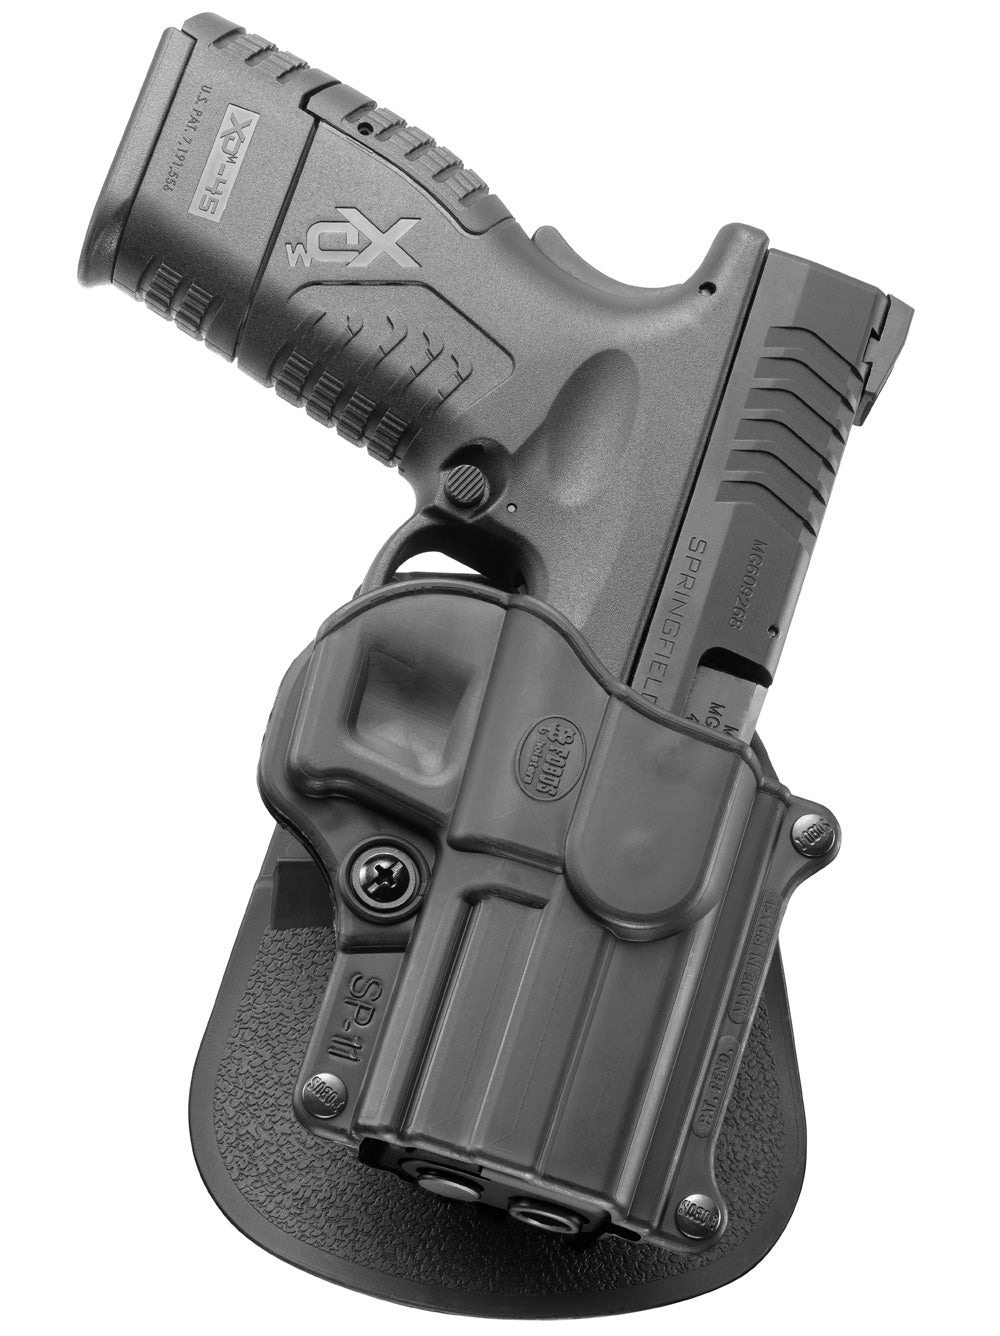 Fobus sp-11 paddle holster